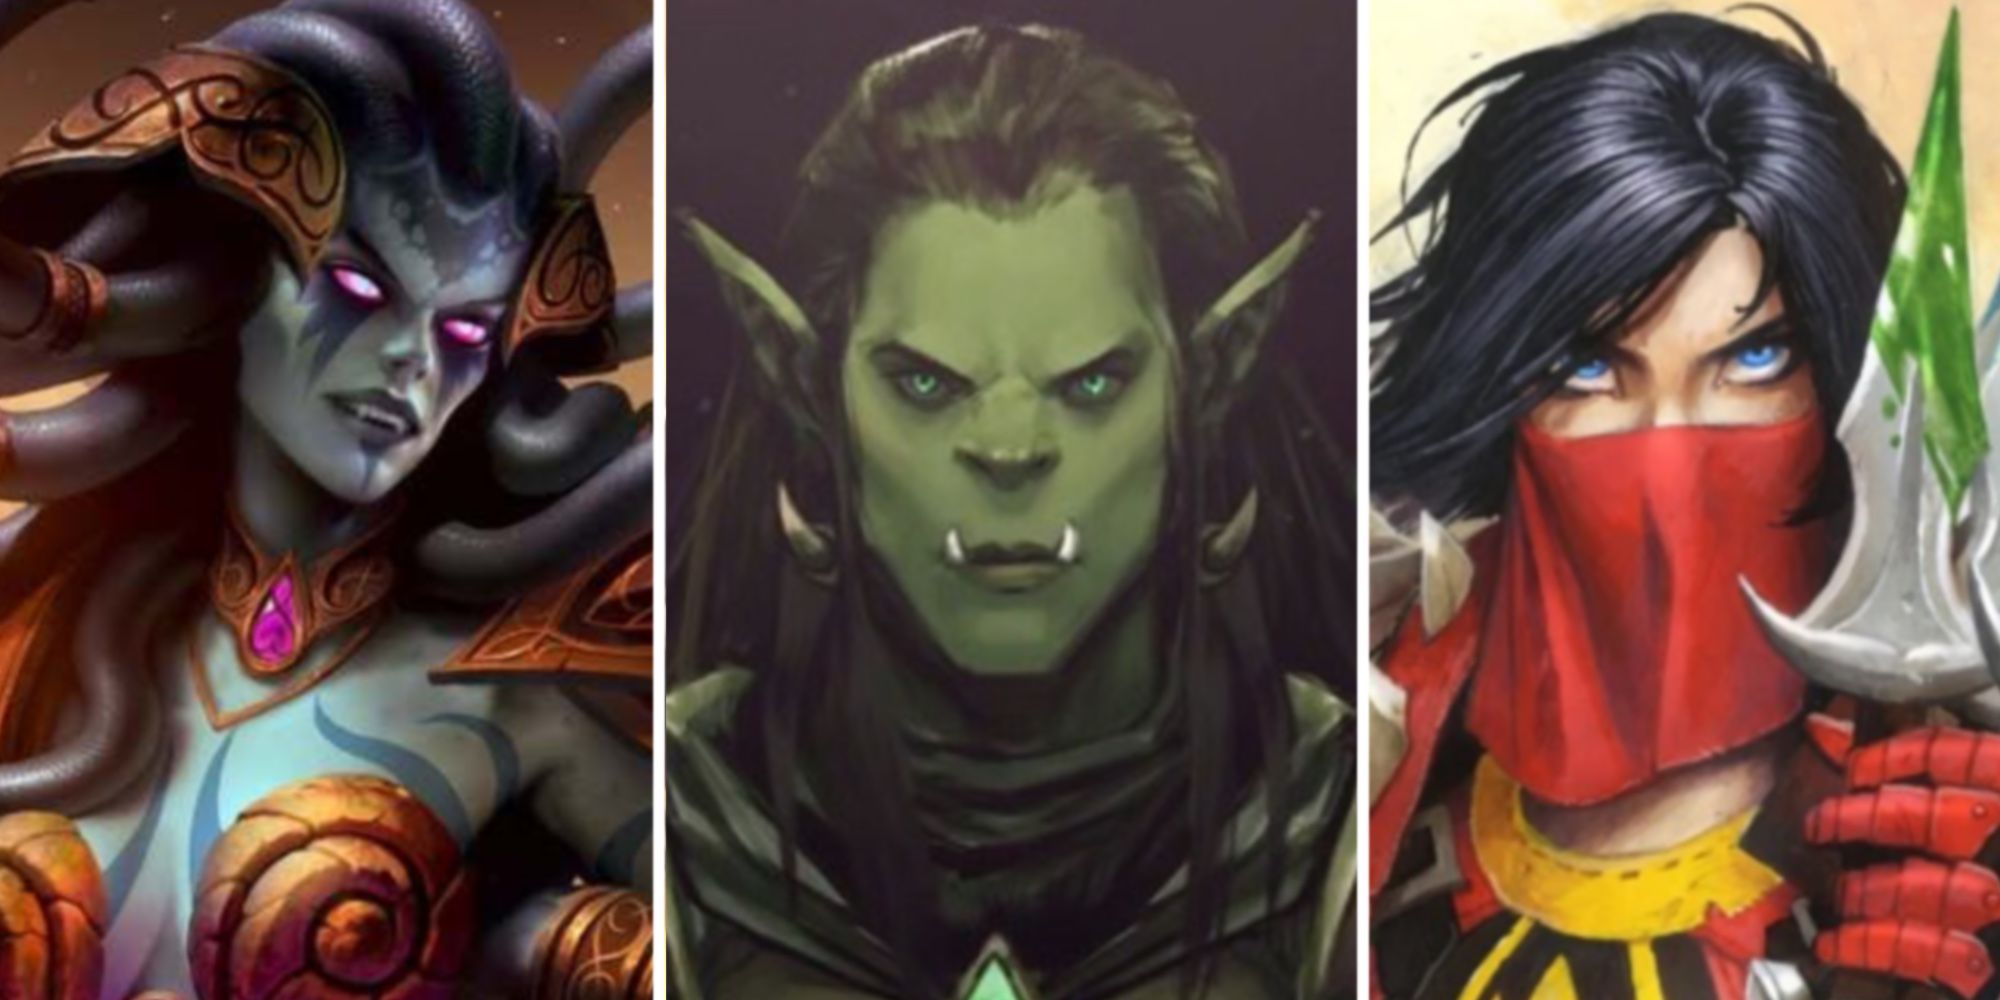 bishop matthew recommends hot world of warcraft characters pic